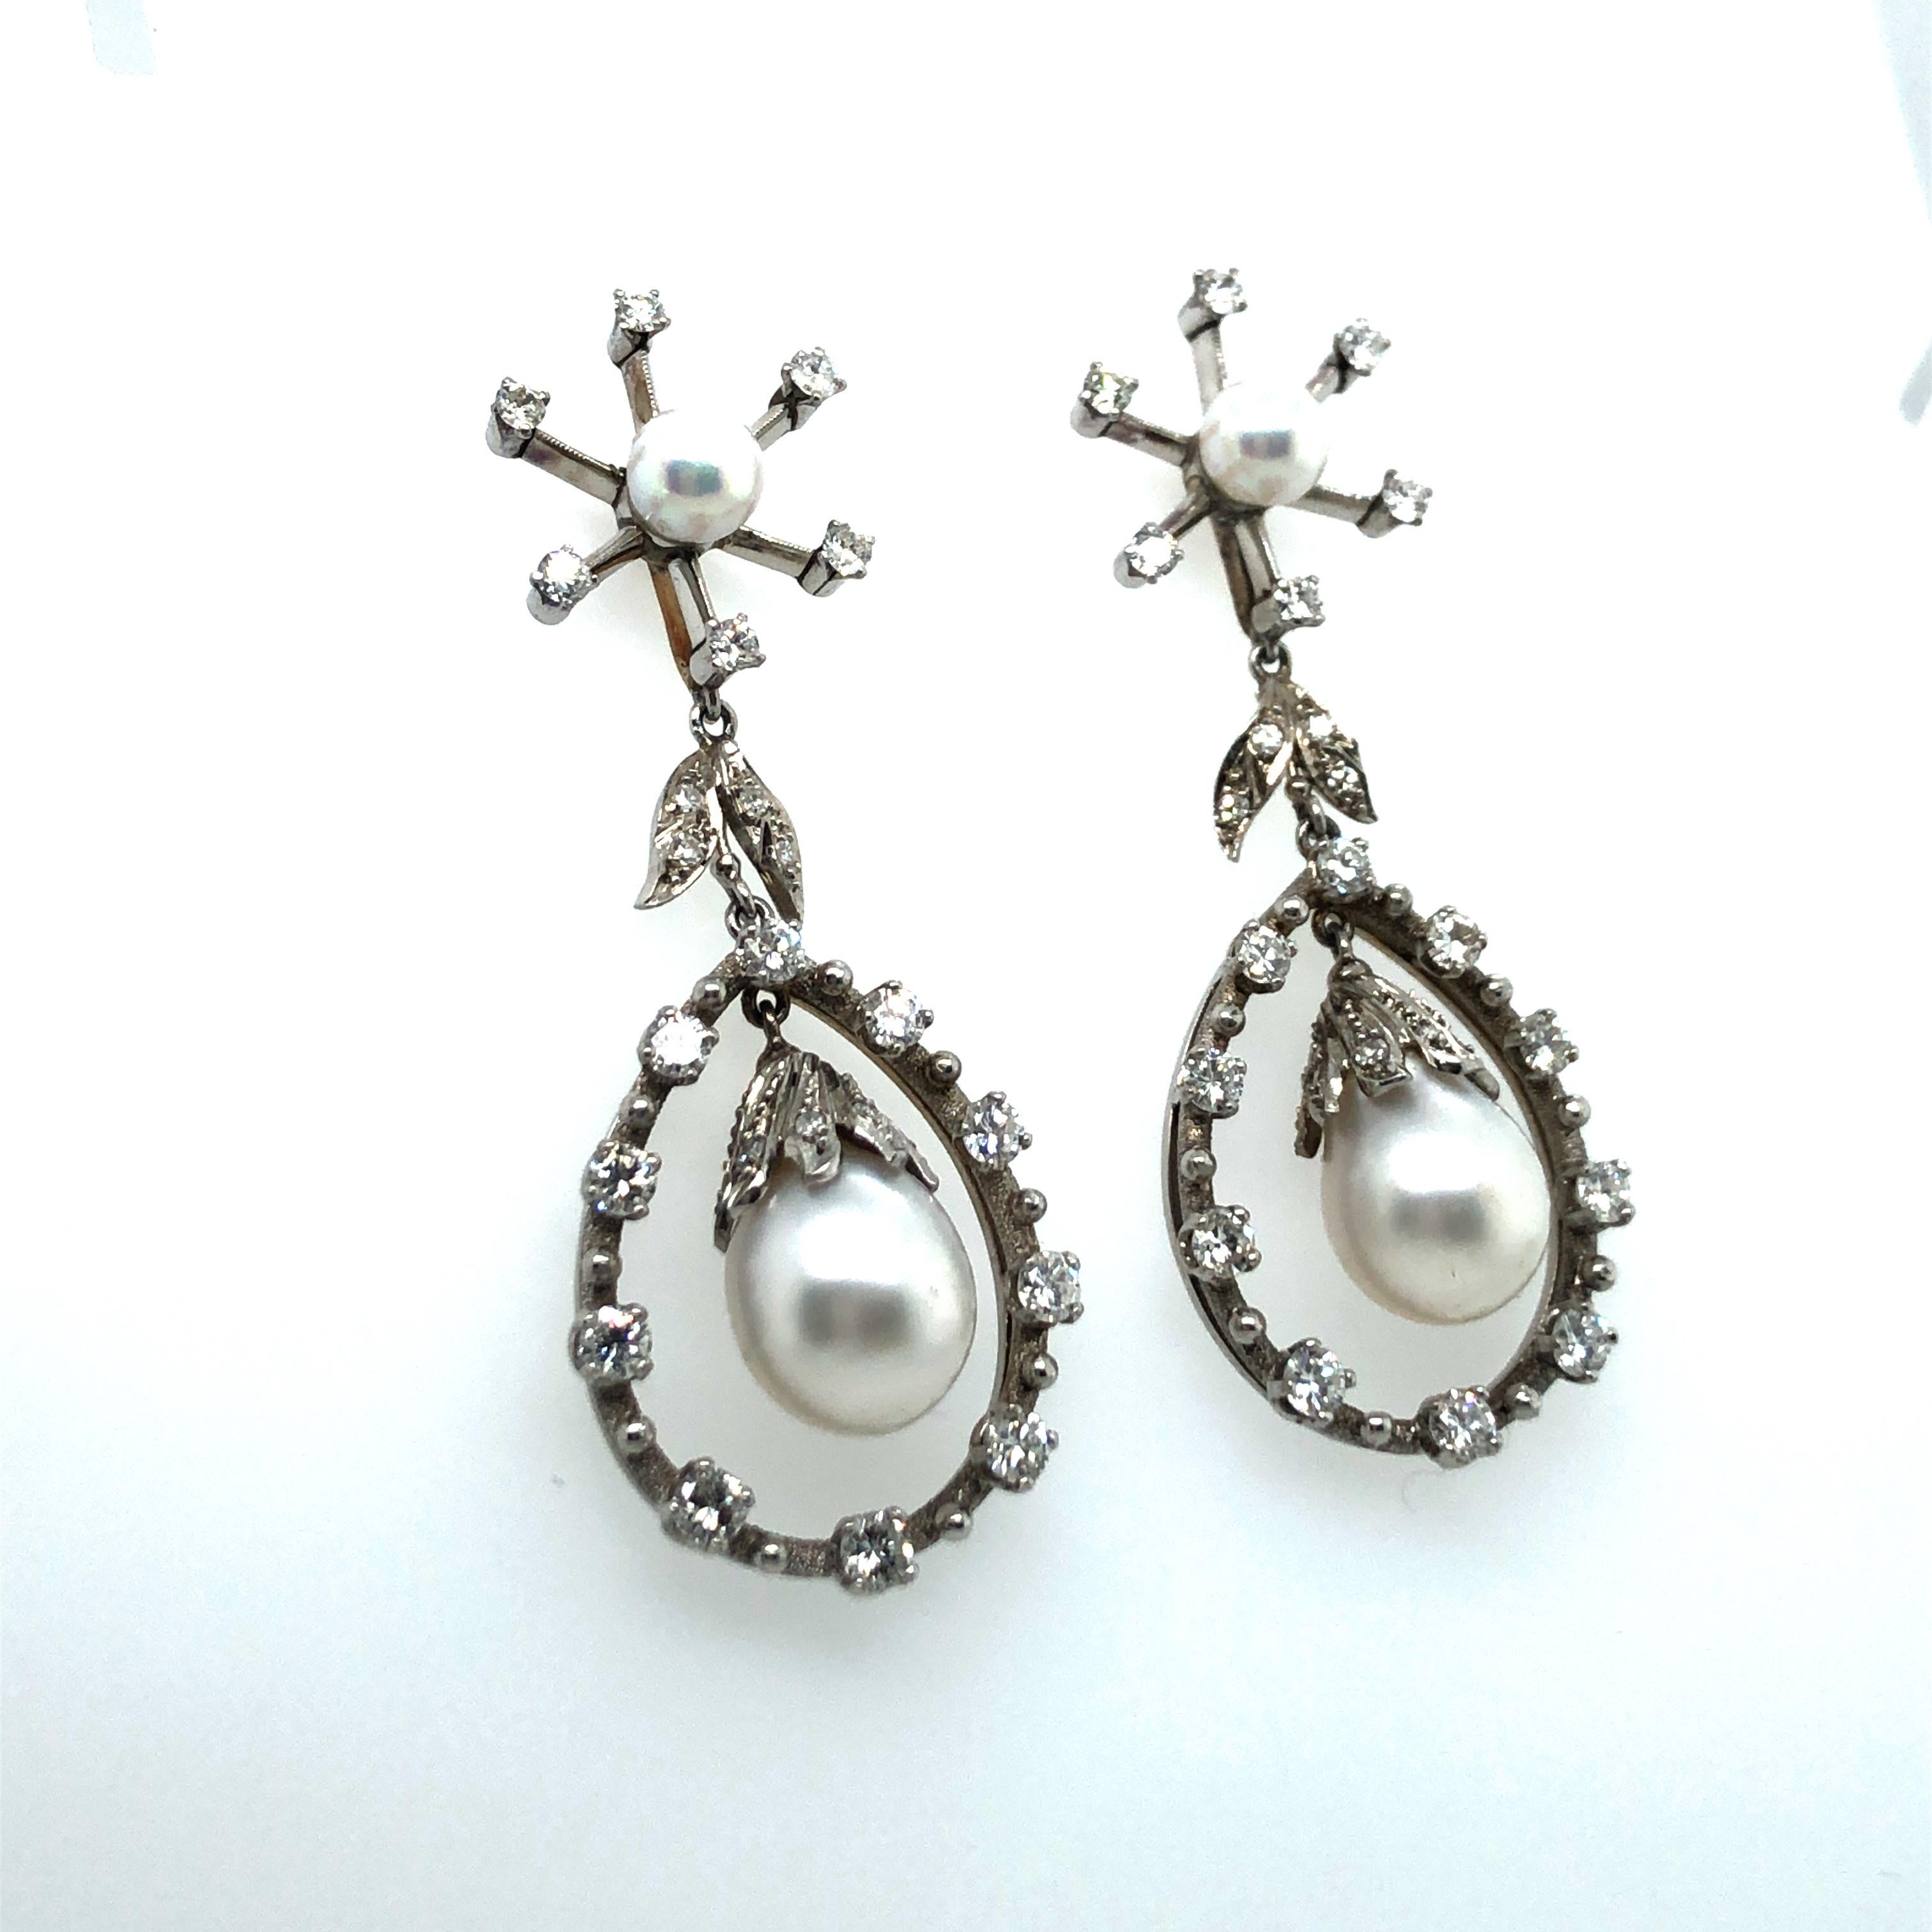 Brilliant Cut Chandelier Earrings with Diamonds and Akoya Pearls in 18k White Gold